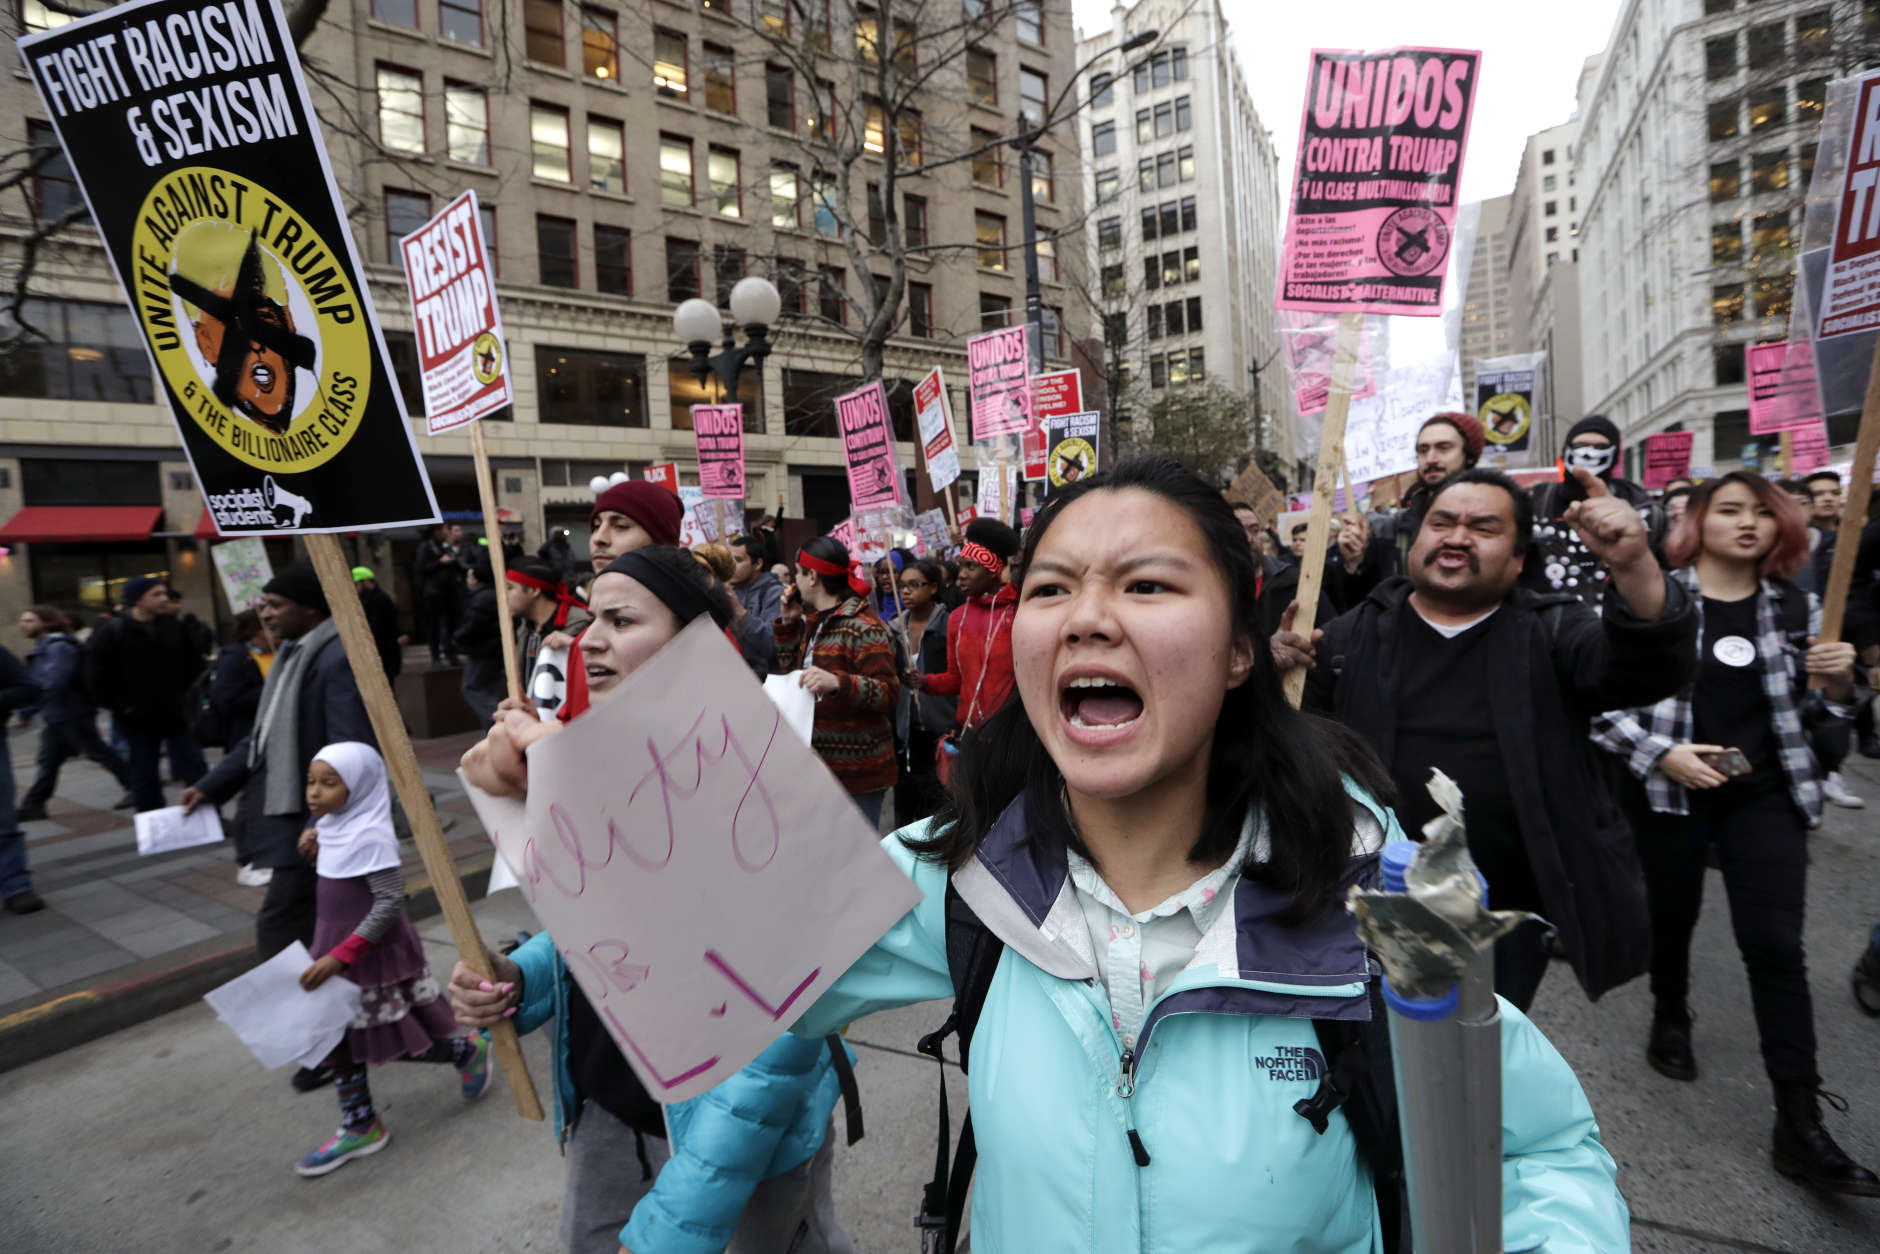 A coalition of students, immigrants, refugees and supporters fill a downtown street as they head to a rally while protesting on Inauguration Day, Friday, Jan. 20, 2017, in Seattle. (AP Photo/Elaine Thompson)